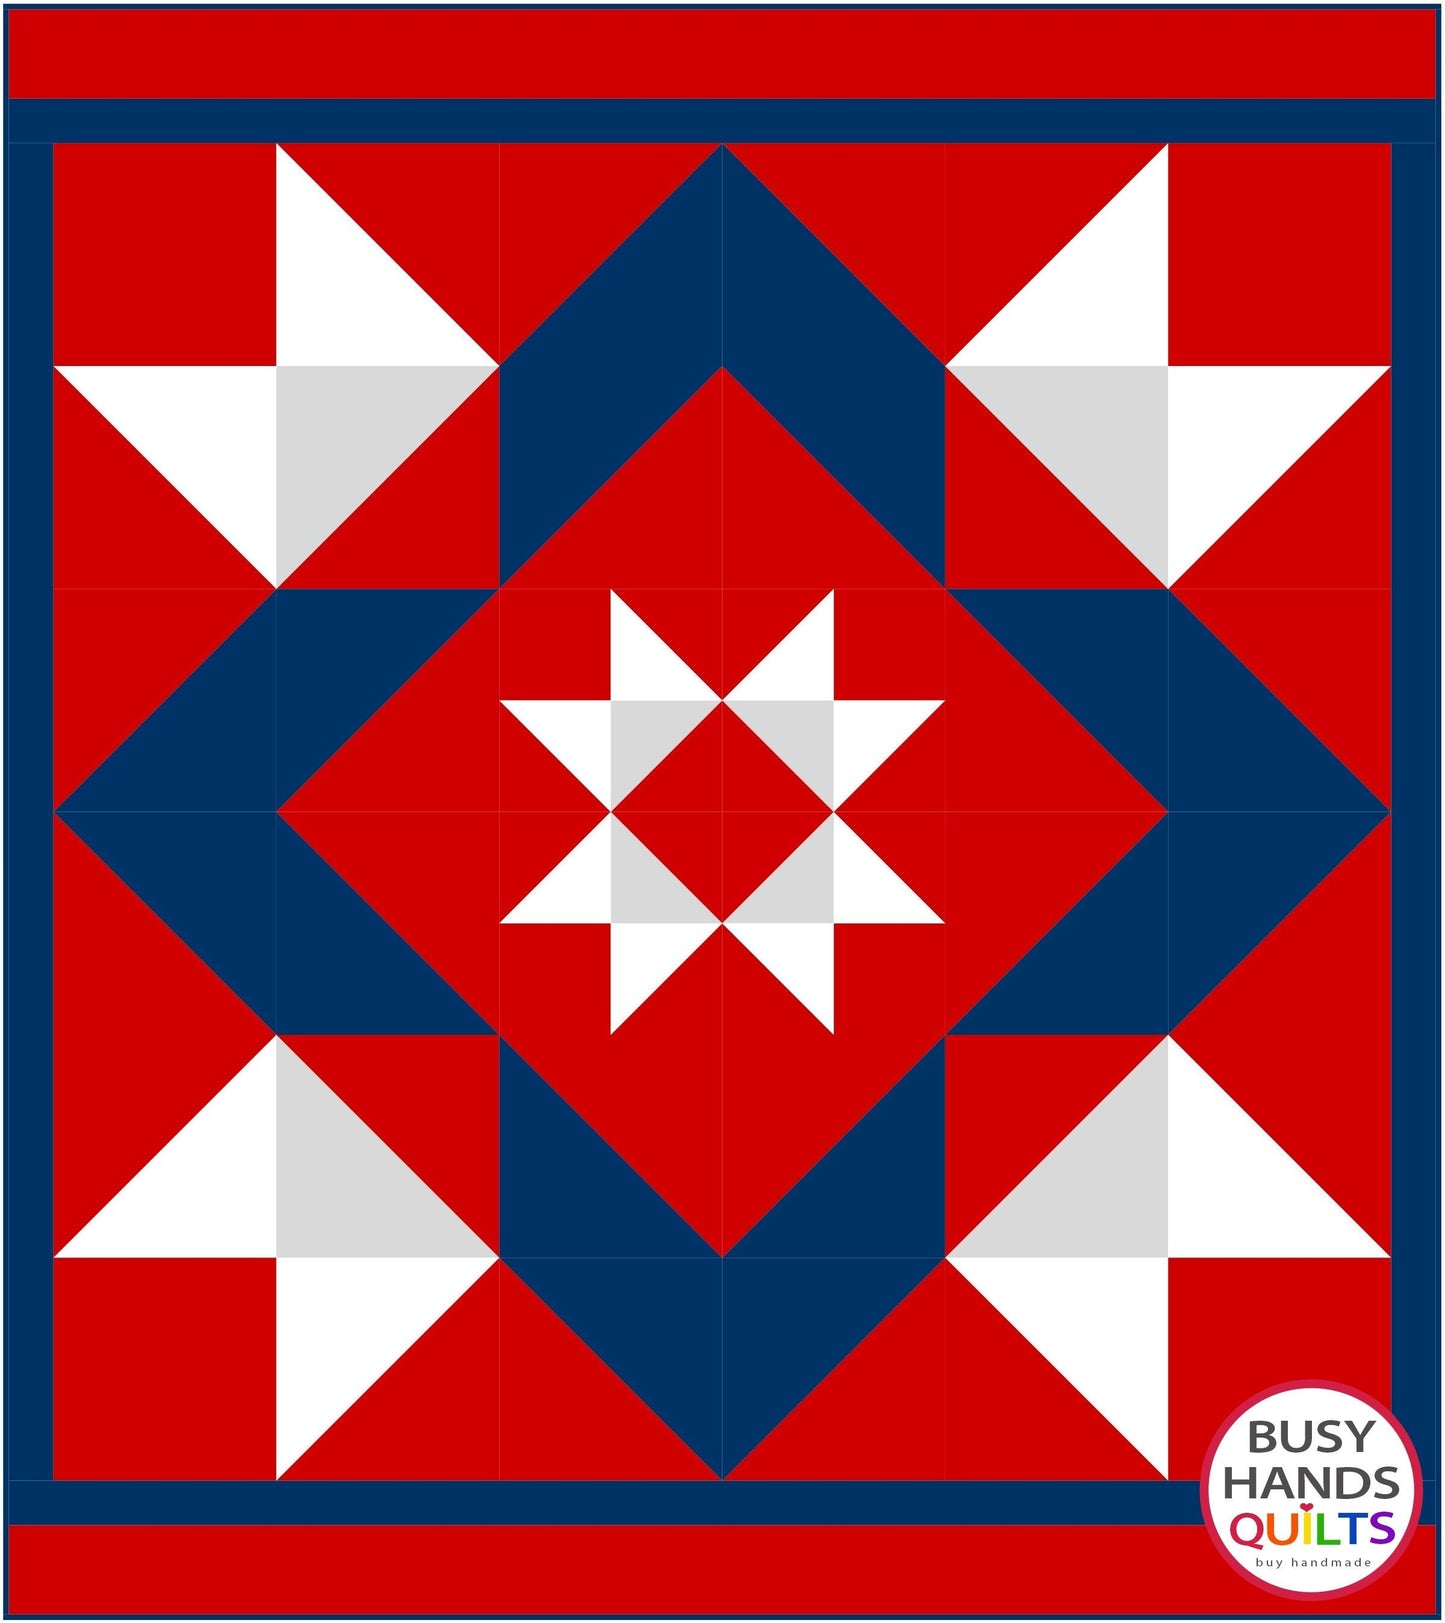 Giant Star Quilt Pattern PDF DOWNLOAD Busy Hands Quilts $12.99